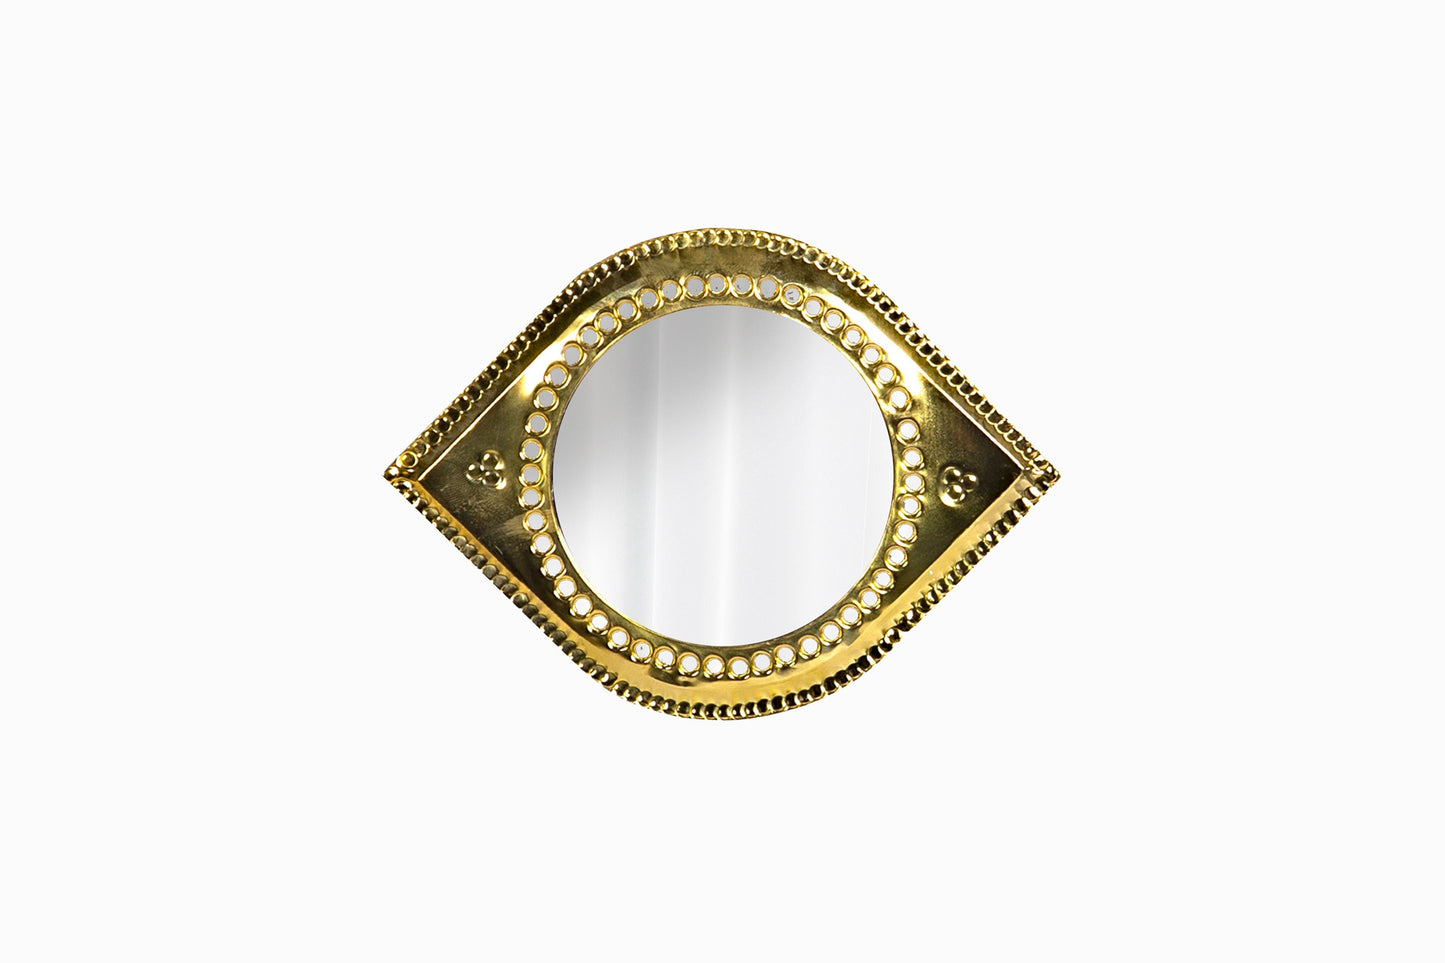 Small mirror eye with holes